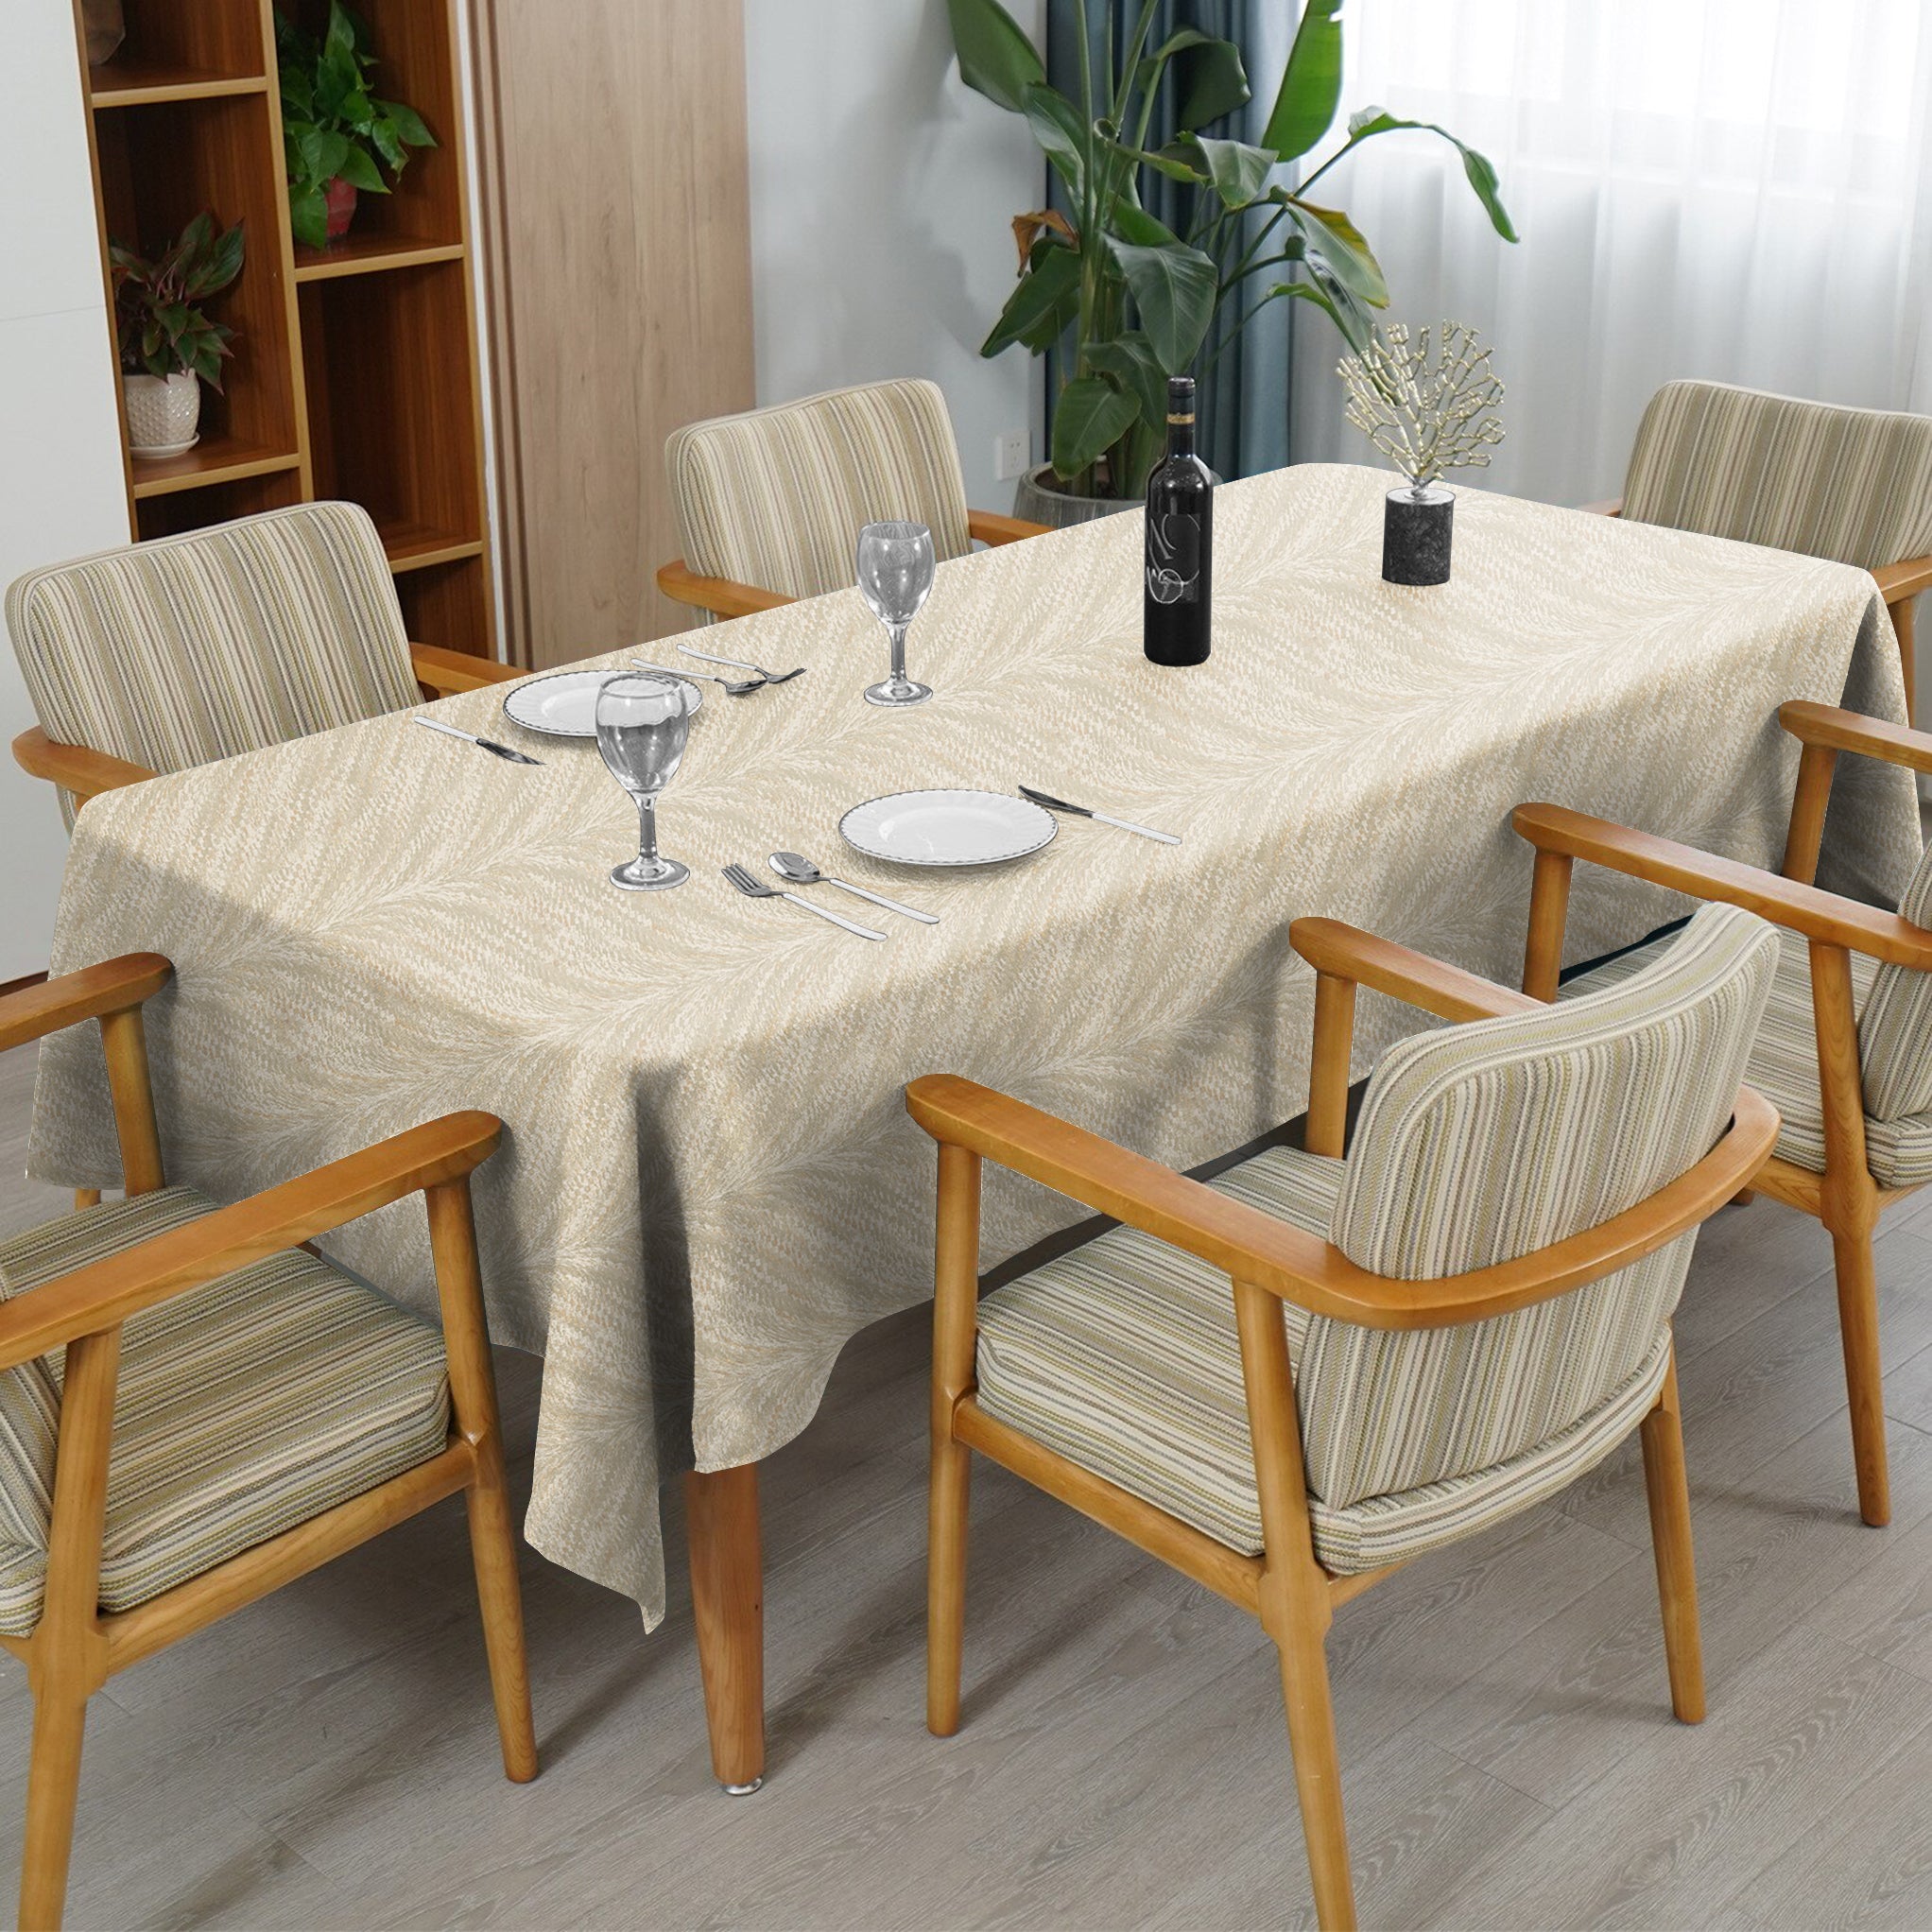 Luxor Stone 6 Seater Table Cloth